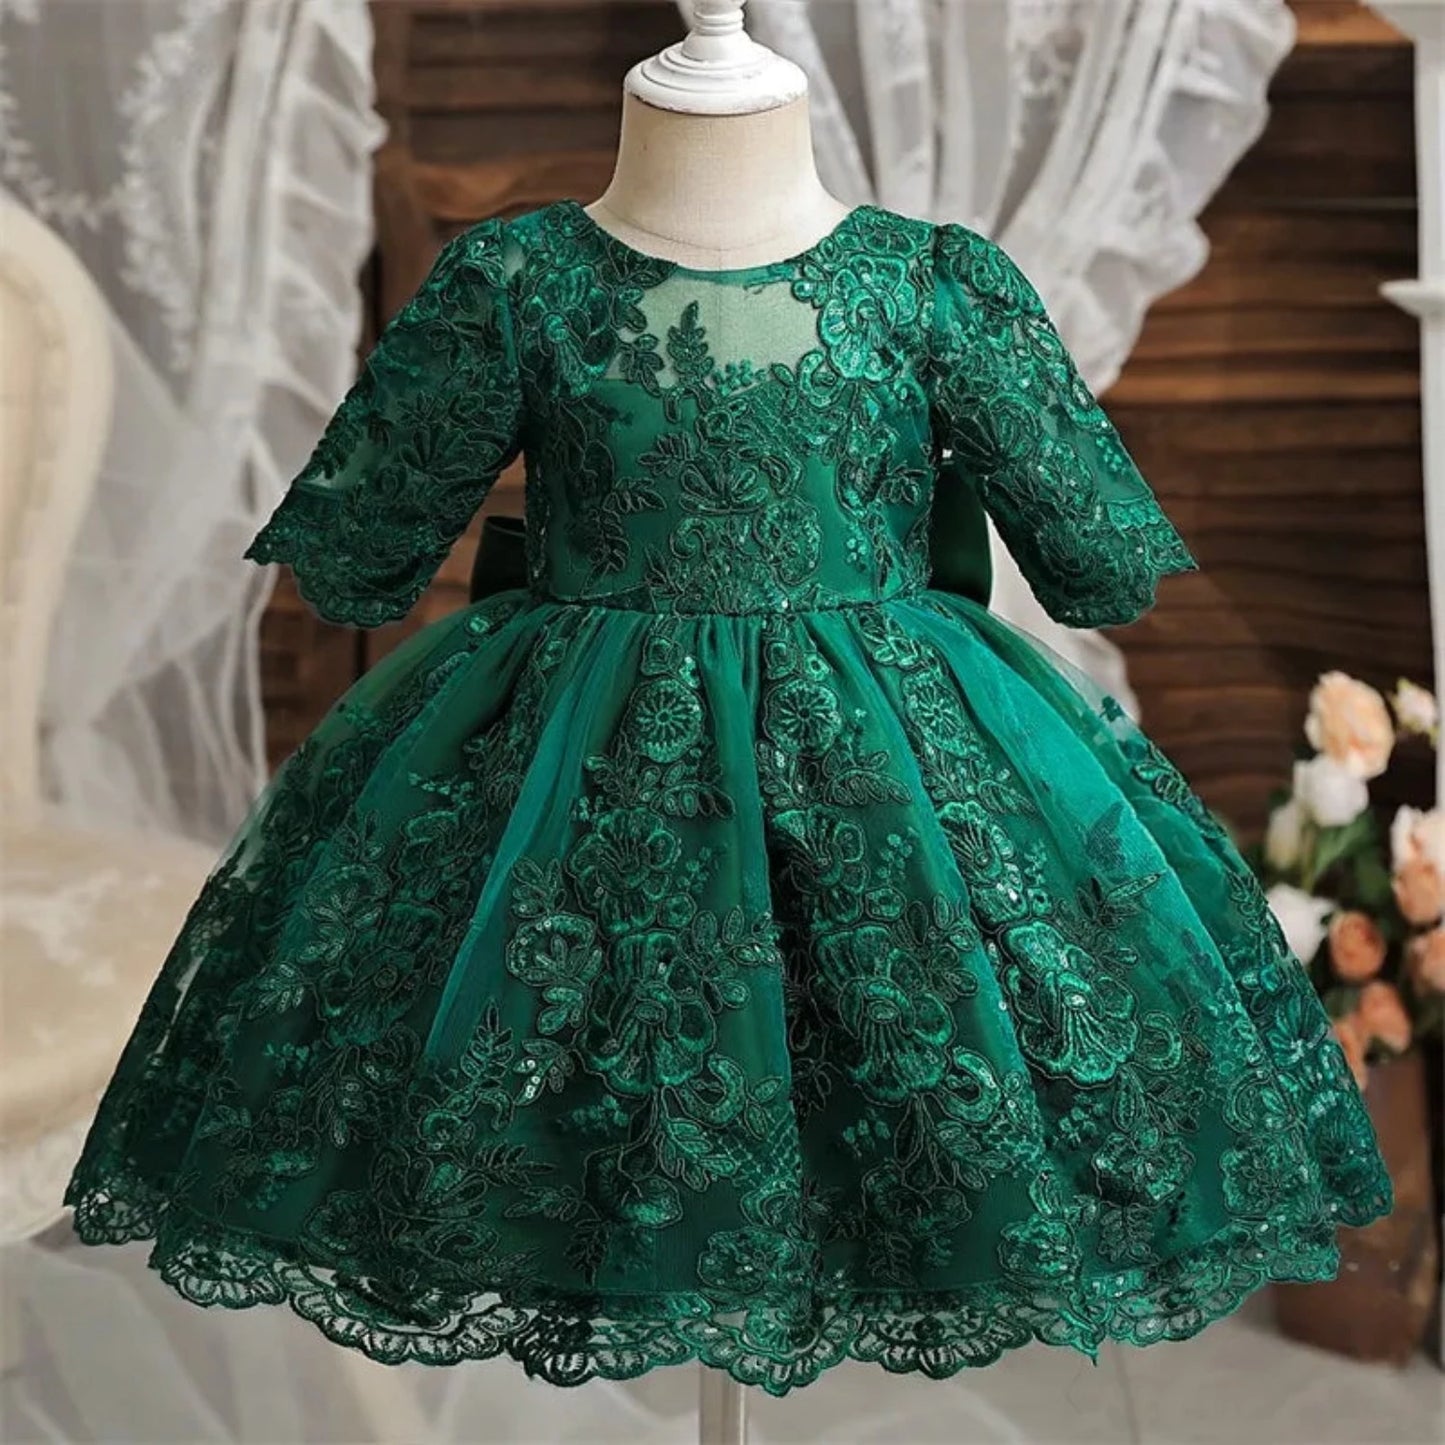 Lace Overlay Green Holiday Dress